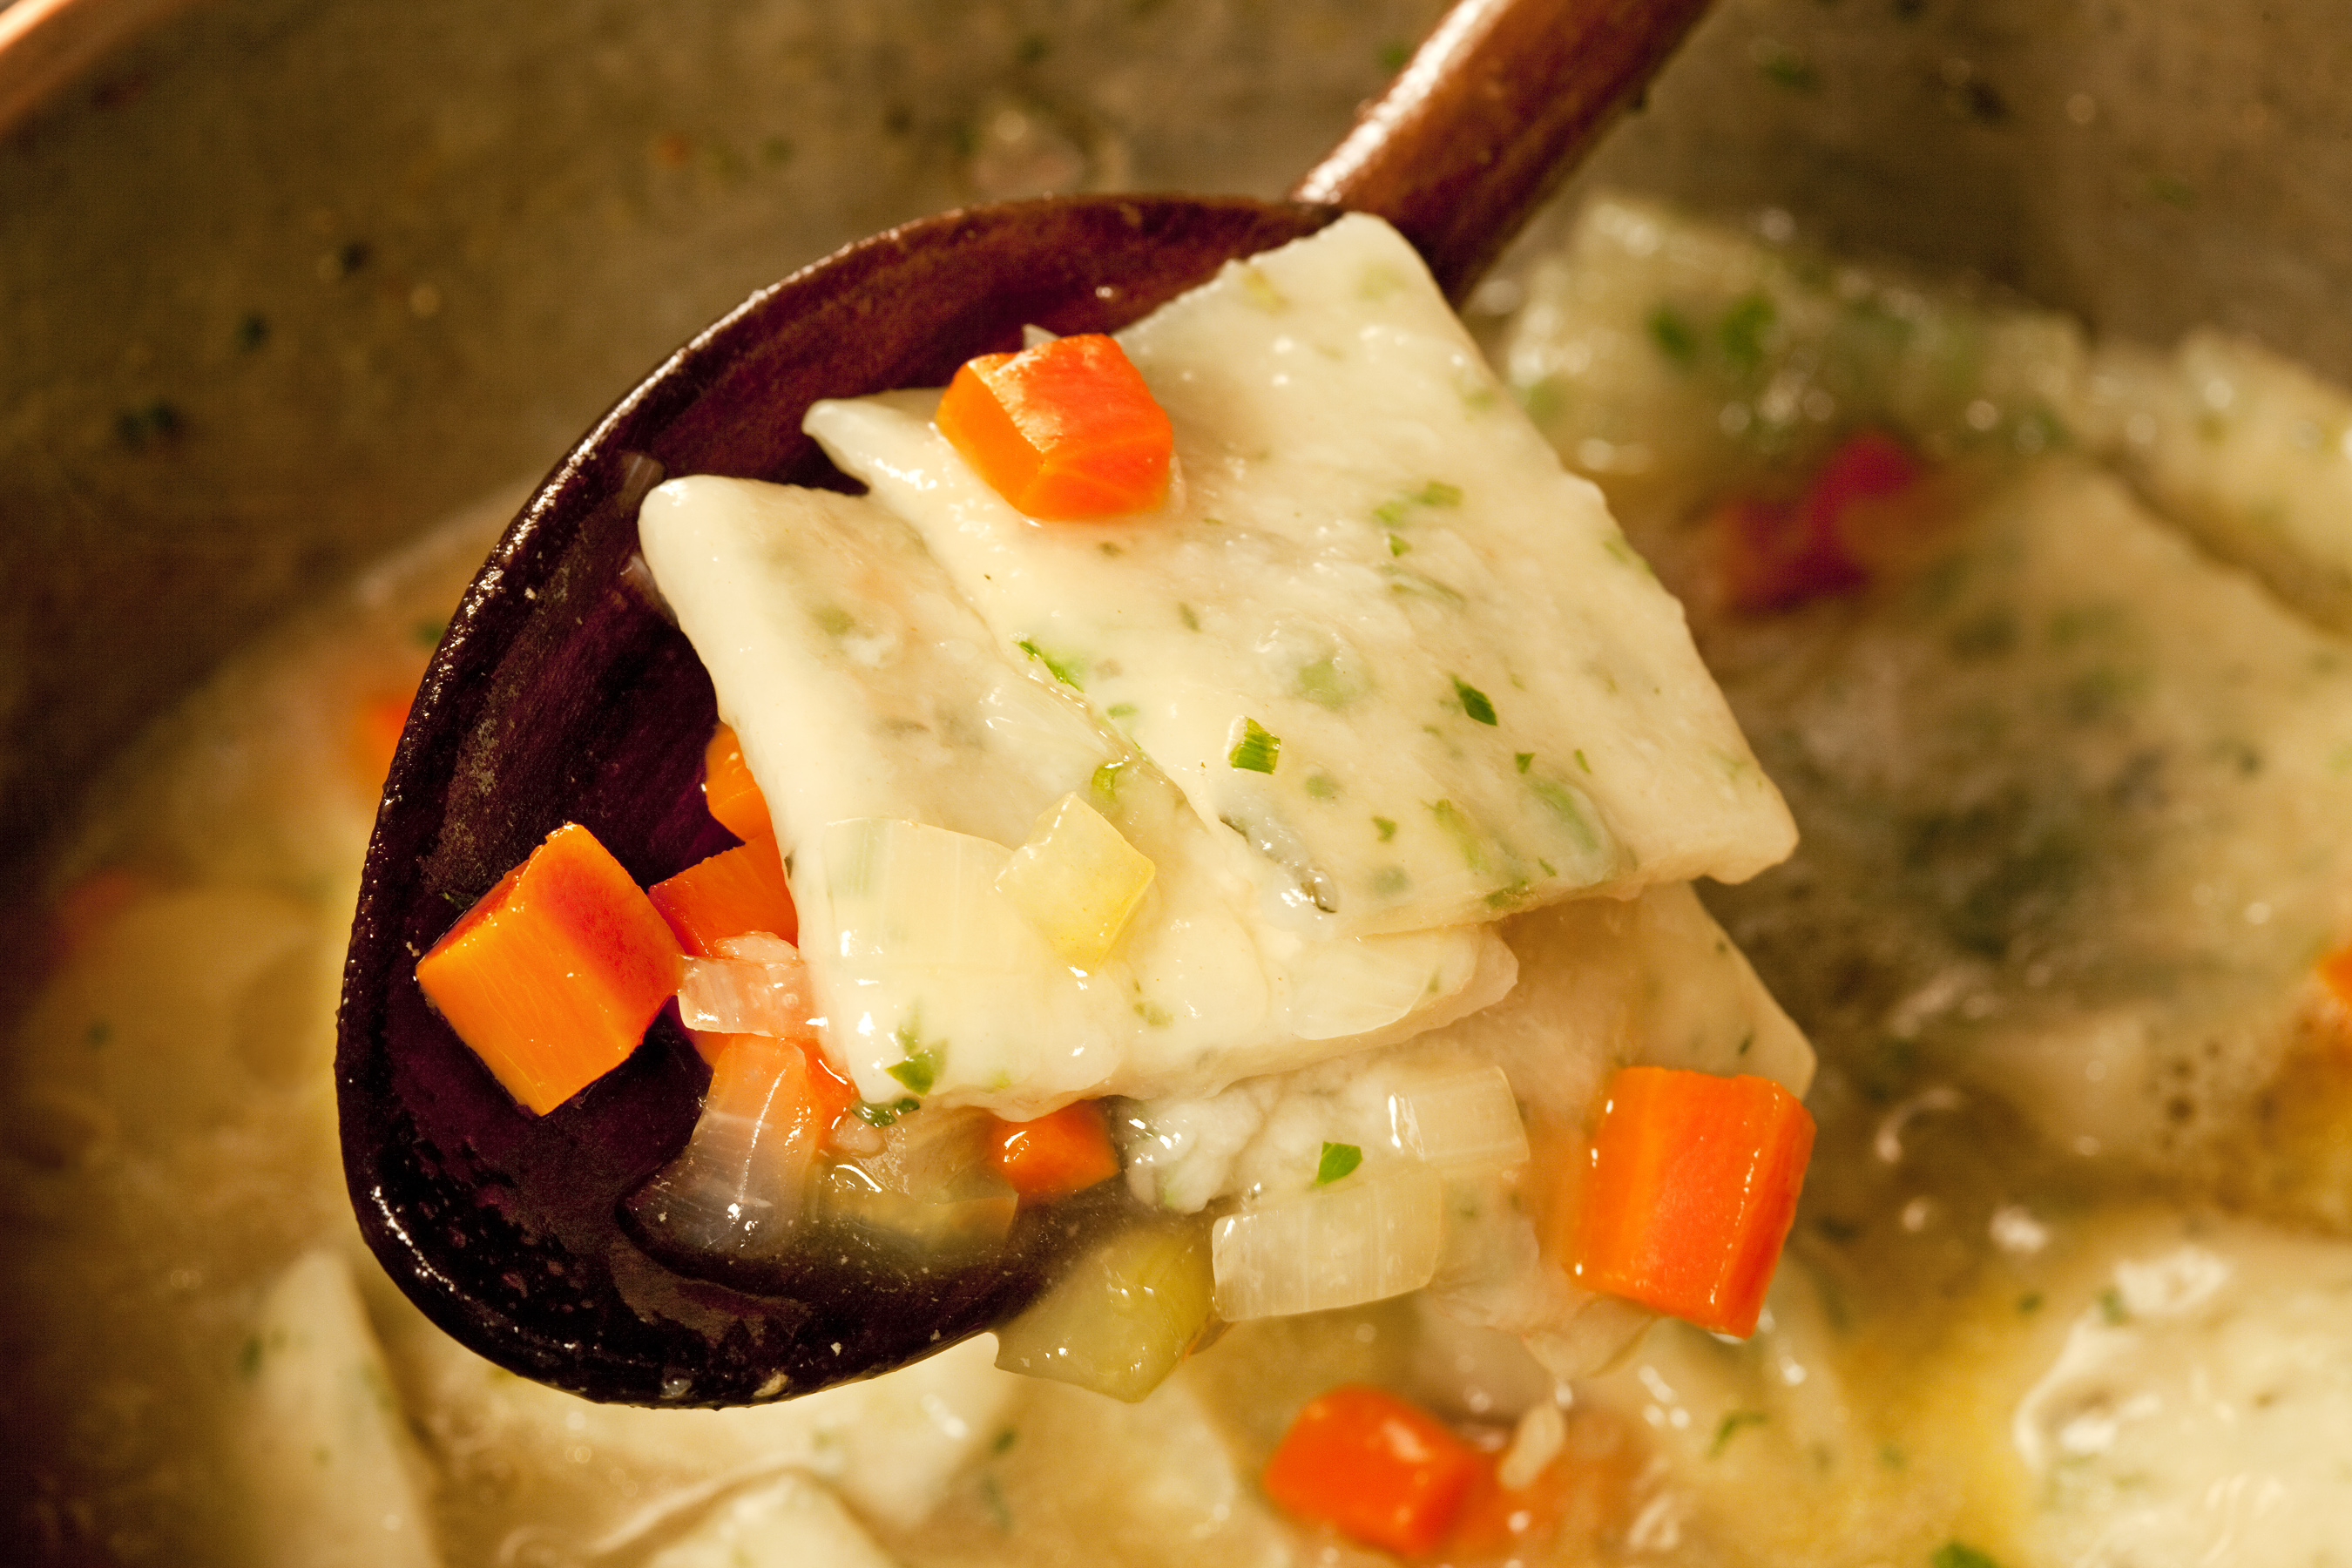 South Your Mouth: Homemade Chicken & Dumplings (Drop or Rolled)